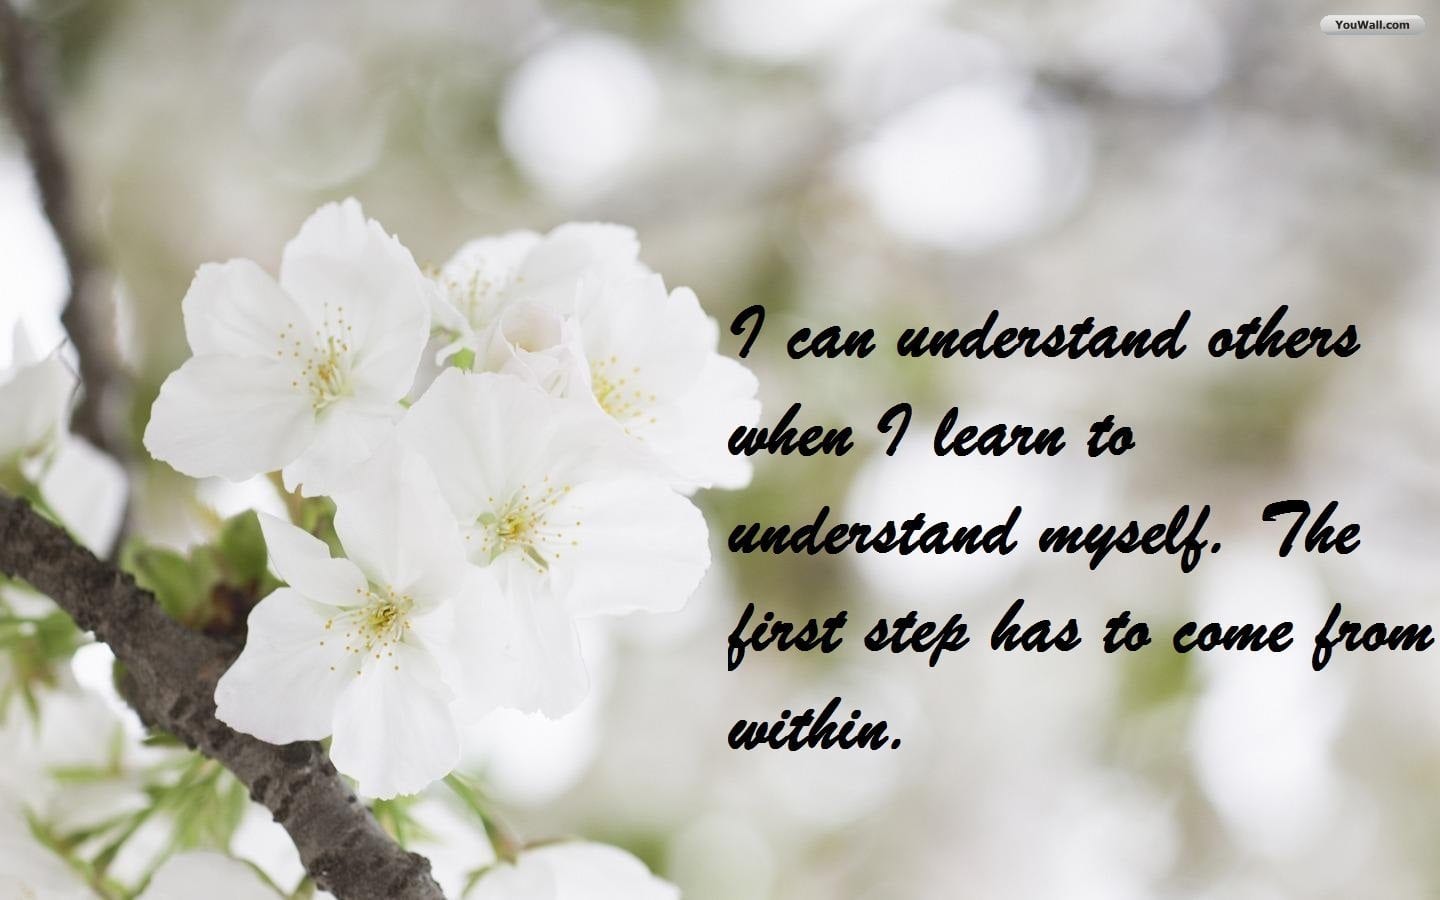 I can understand others when I learn to understand myself the first step has to come from within